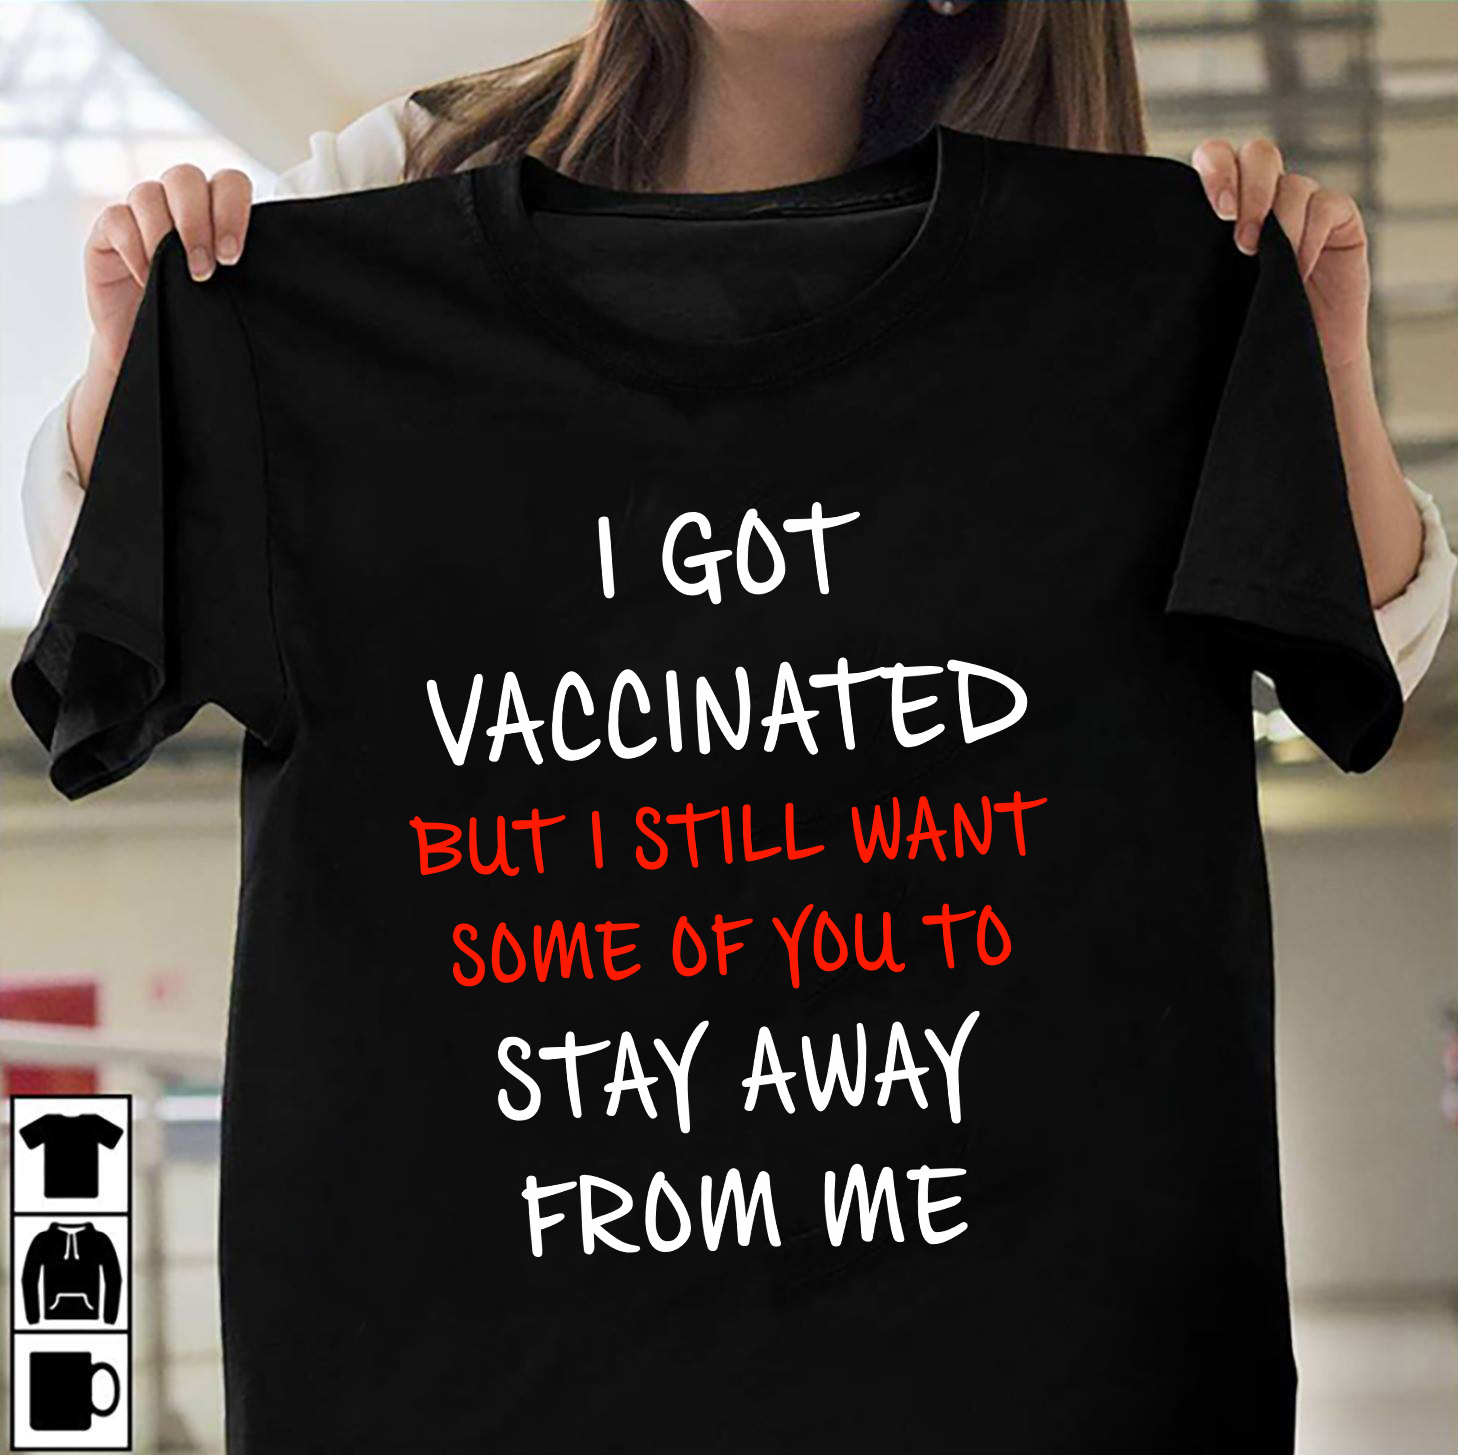 I got vaccinated but I still want some of you to stay away from me